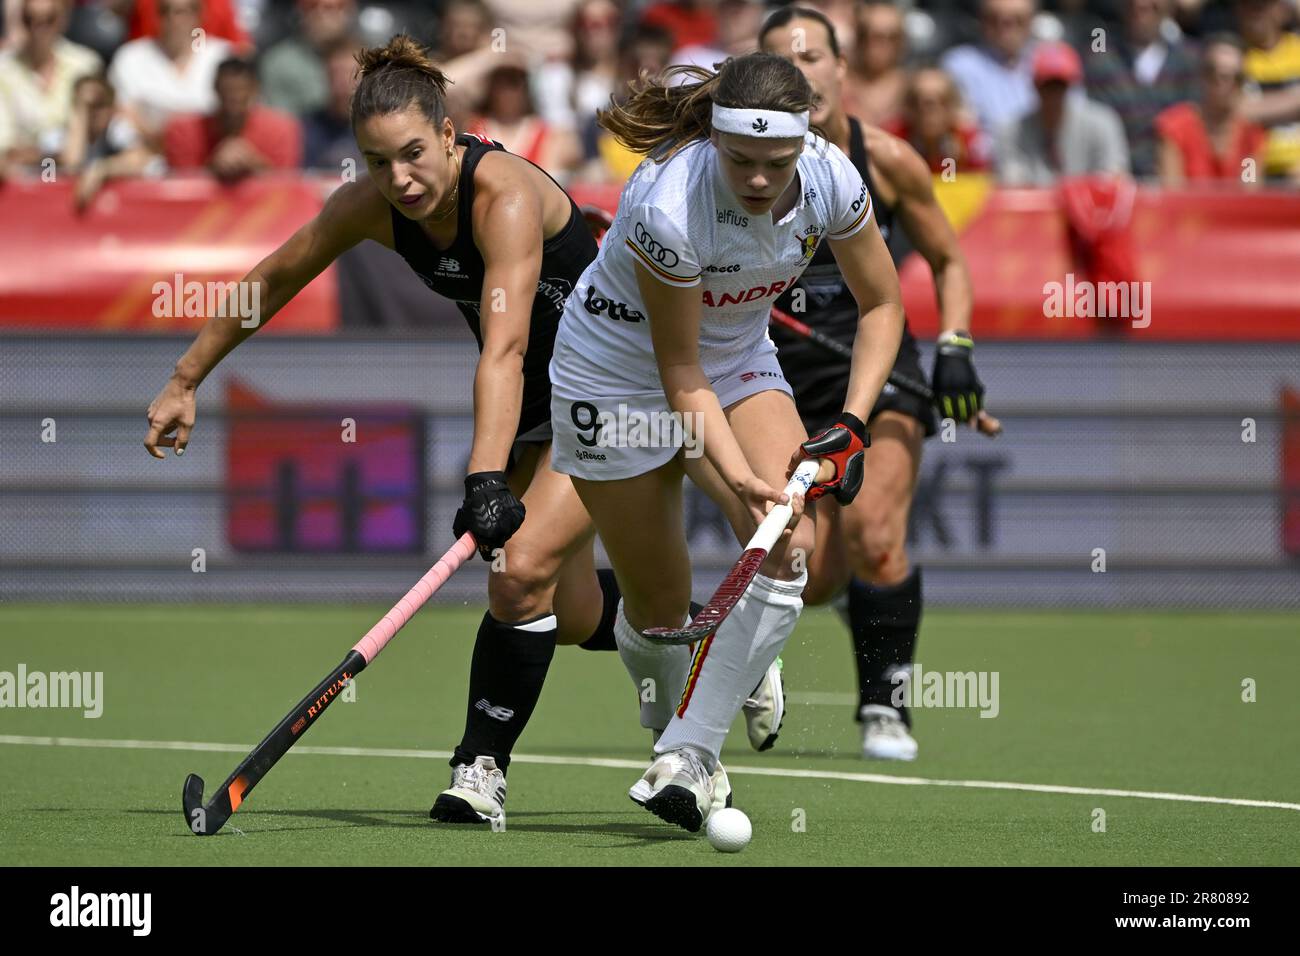 Belgium's Emily White pictured in action during a hockey game between Belgian national team Red Panthers and New Zealand, Sunday 18 June 2023 in Antwerp, match 6/12 in the group stage of the 2023 Women's FIH Pro League. BELGA PHOTO DIRK WAEM Stock Photo